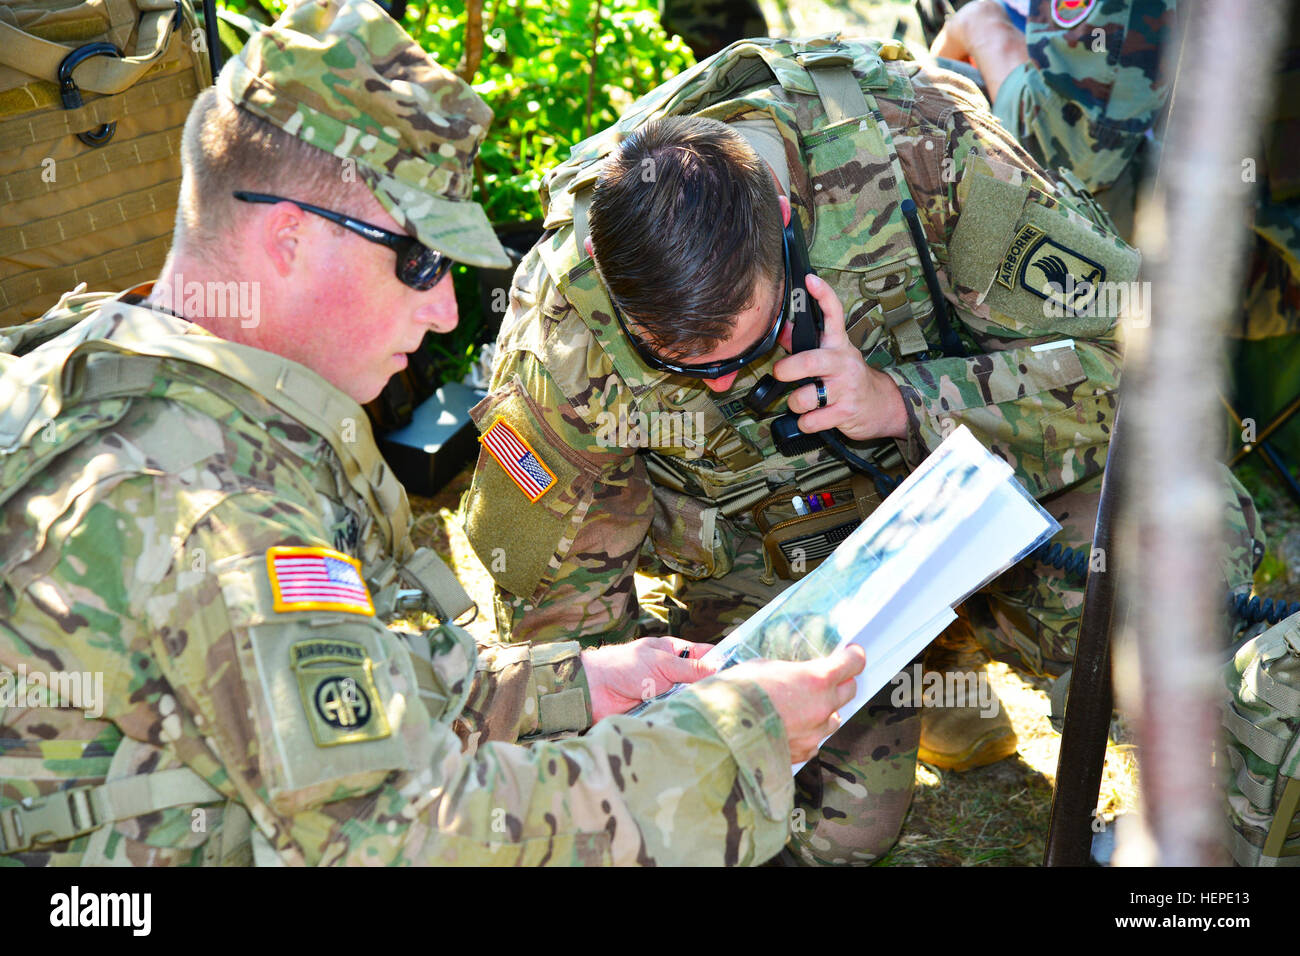 Spc. Brock Higgins (right), a paratrooper assigned to the 1st Battalion, 503rd Infantry Regiment, 173rd Airborne Brigade, conducts a radio check while Staff Sgt. Brian Finger (left), a paratrooper assigned to the 2nd Battalion, 503rd Infantry Regiment, 173rd Airborne Brigade, plots a target on a map June 3, 2015 during a Adriatic Strike exercise at Pocek Range in Postonja, Slovenia. This training gives U.S. joint terminal attack controllers the chance to work directly with the militaries of other partner nations. The exercise brought together NATO allies from the U.S. and Slovenian militaries  Stock Photo